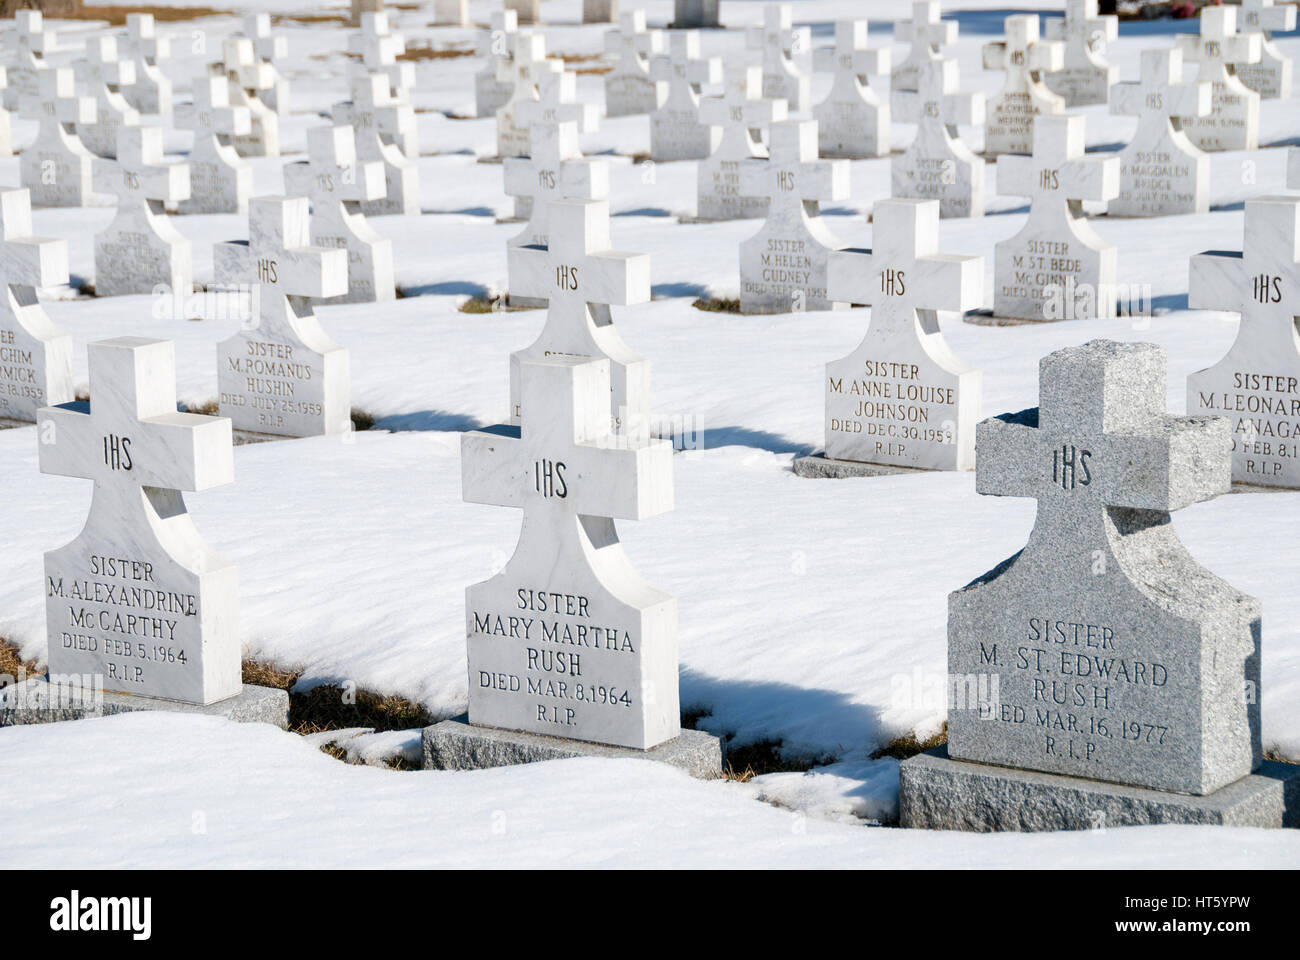 Symmetrical rows of headstones in a cemetery marking the graves of Catholic nuns Stock Photo